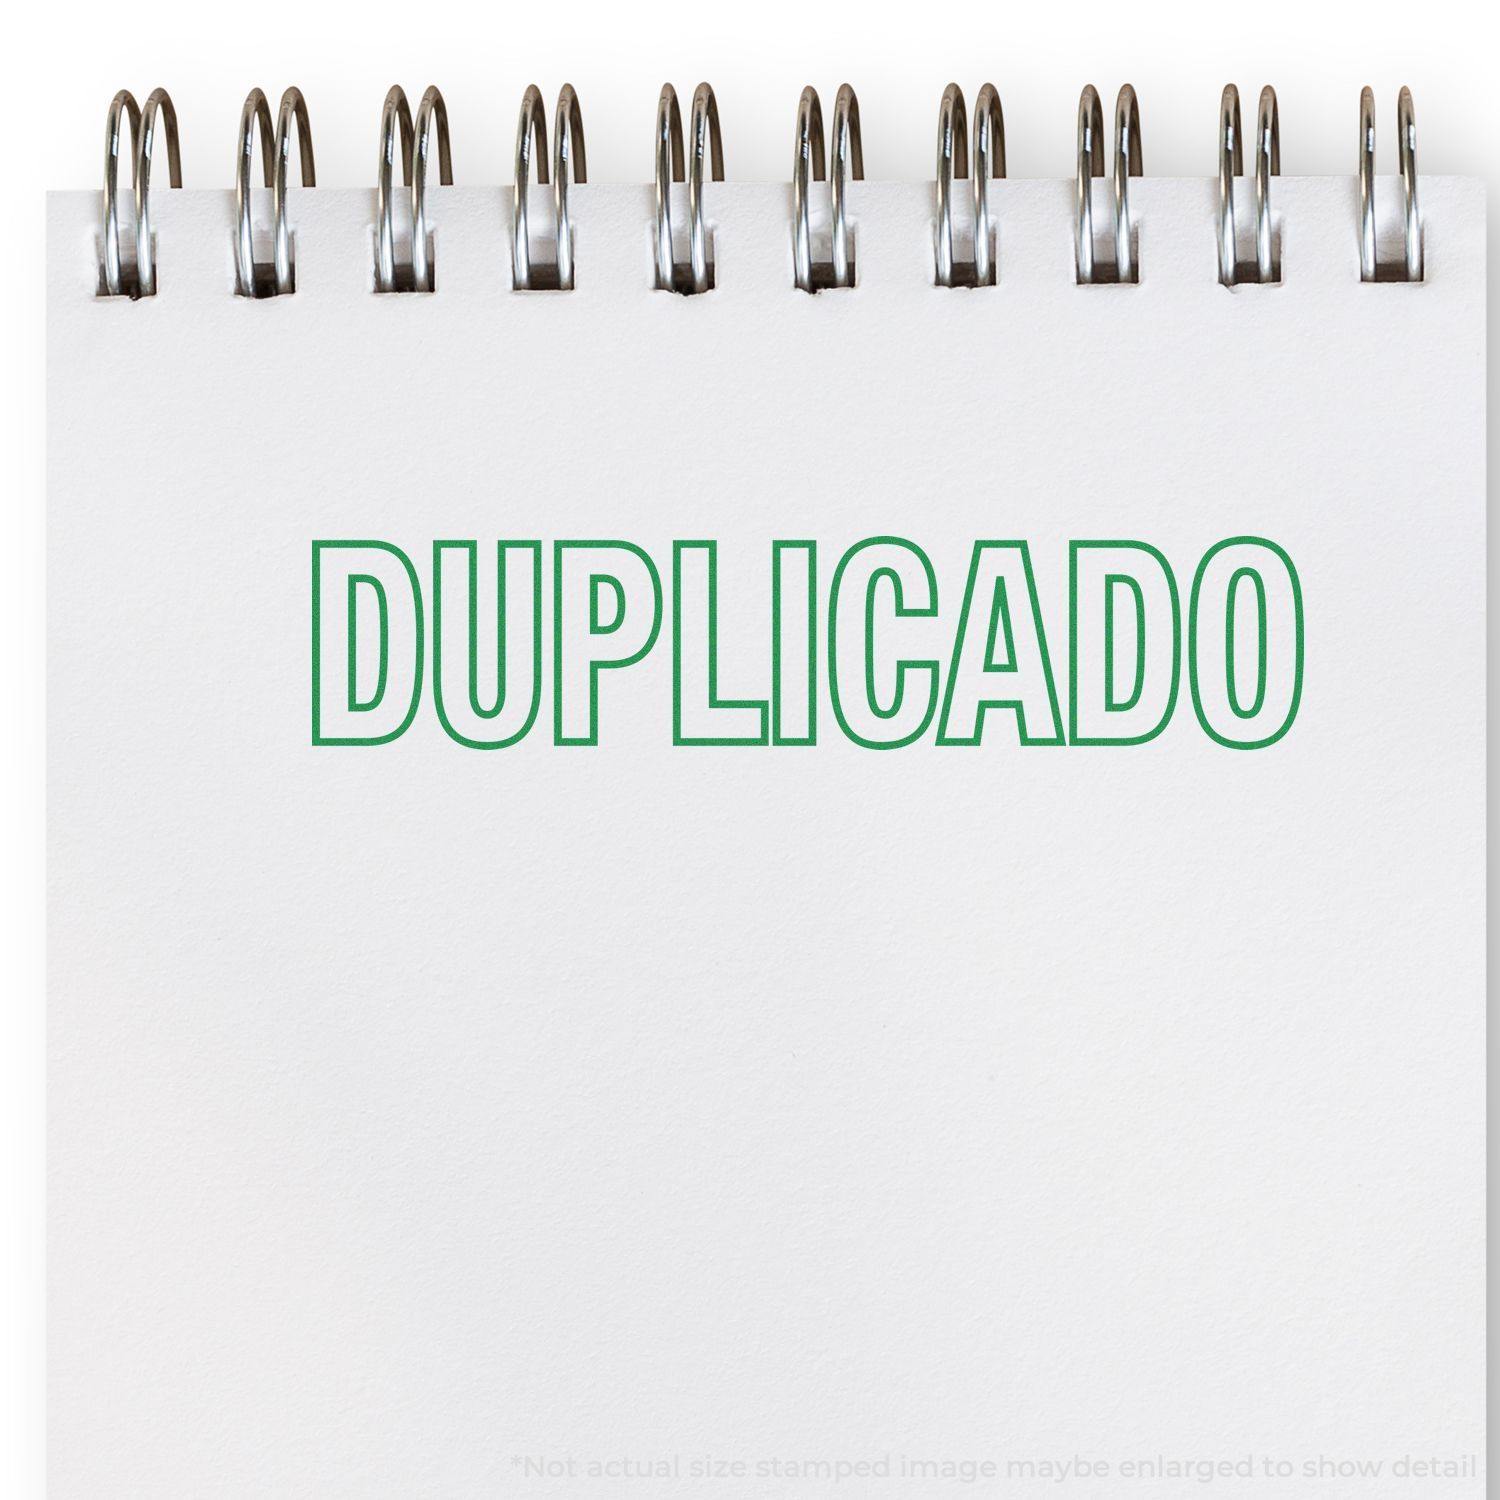 A self-inking stamp with a stamped image showing how the text "DUPLICADO" in a large outline style is displayed by it after stamping.